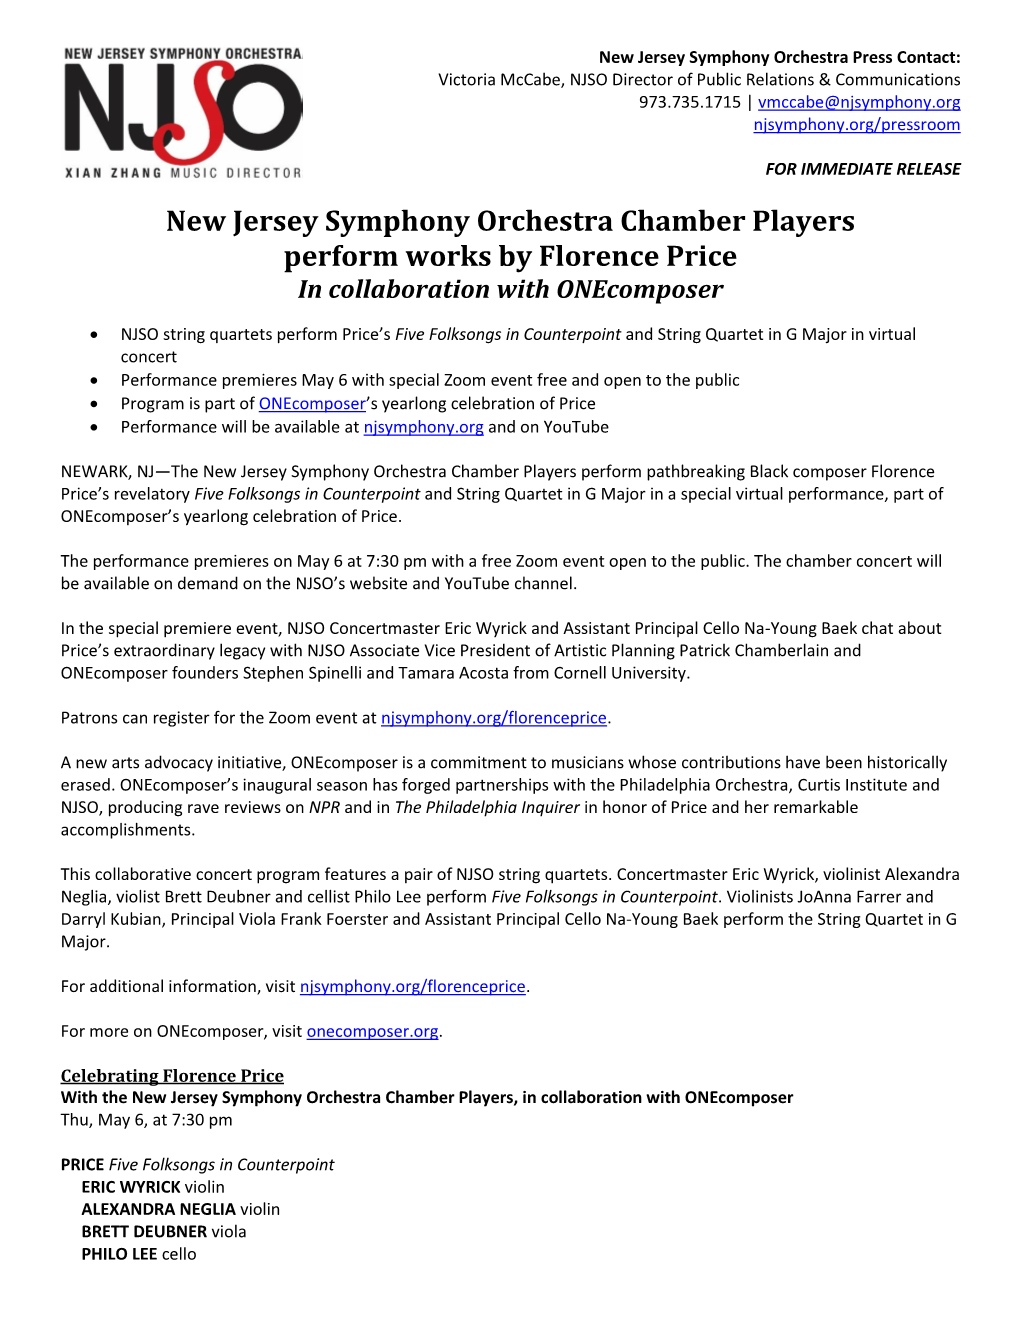 New Jersey Symphony Orchestra Chamber Players Perform Works by Florence Price in Collaboration with Onecomposer